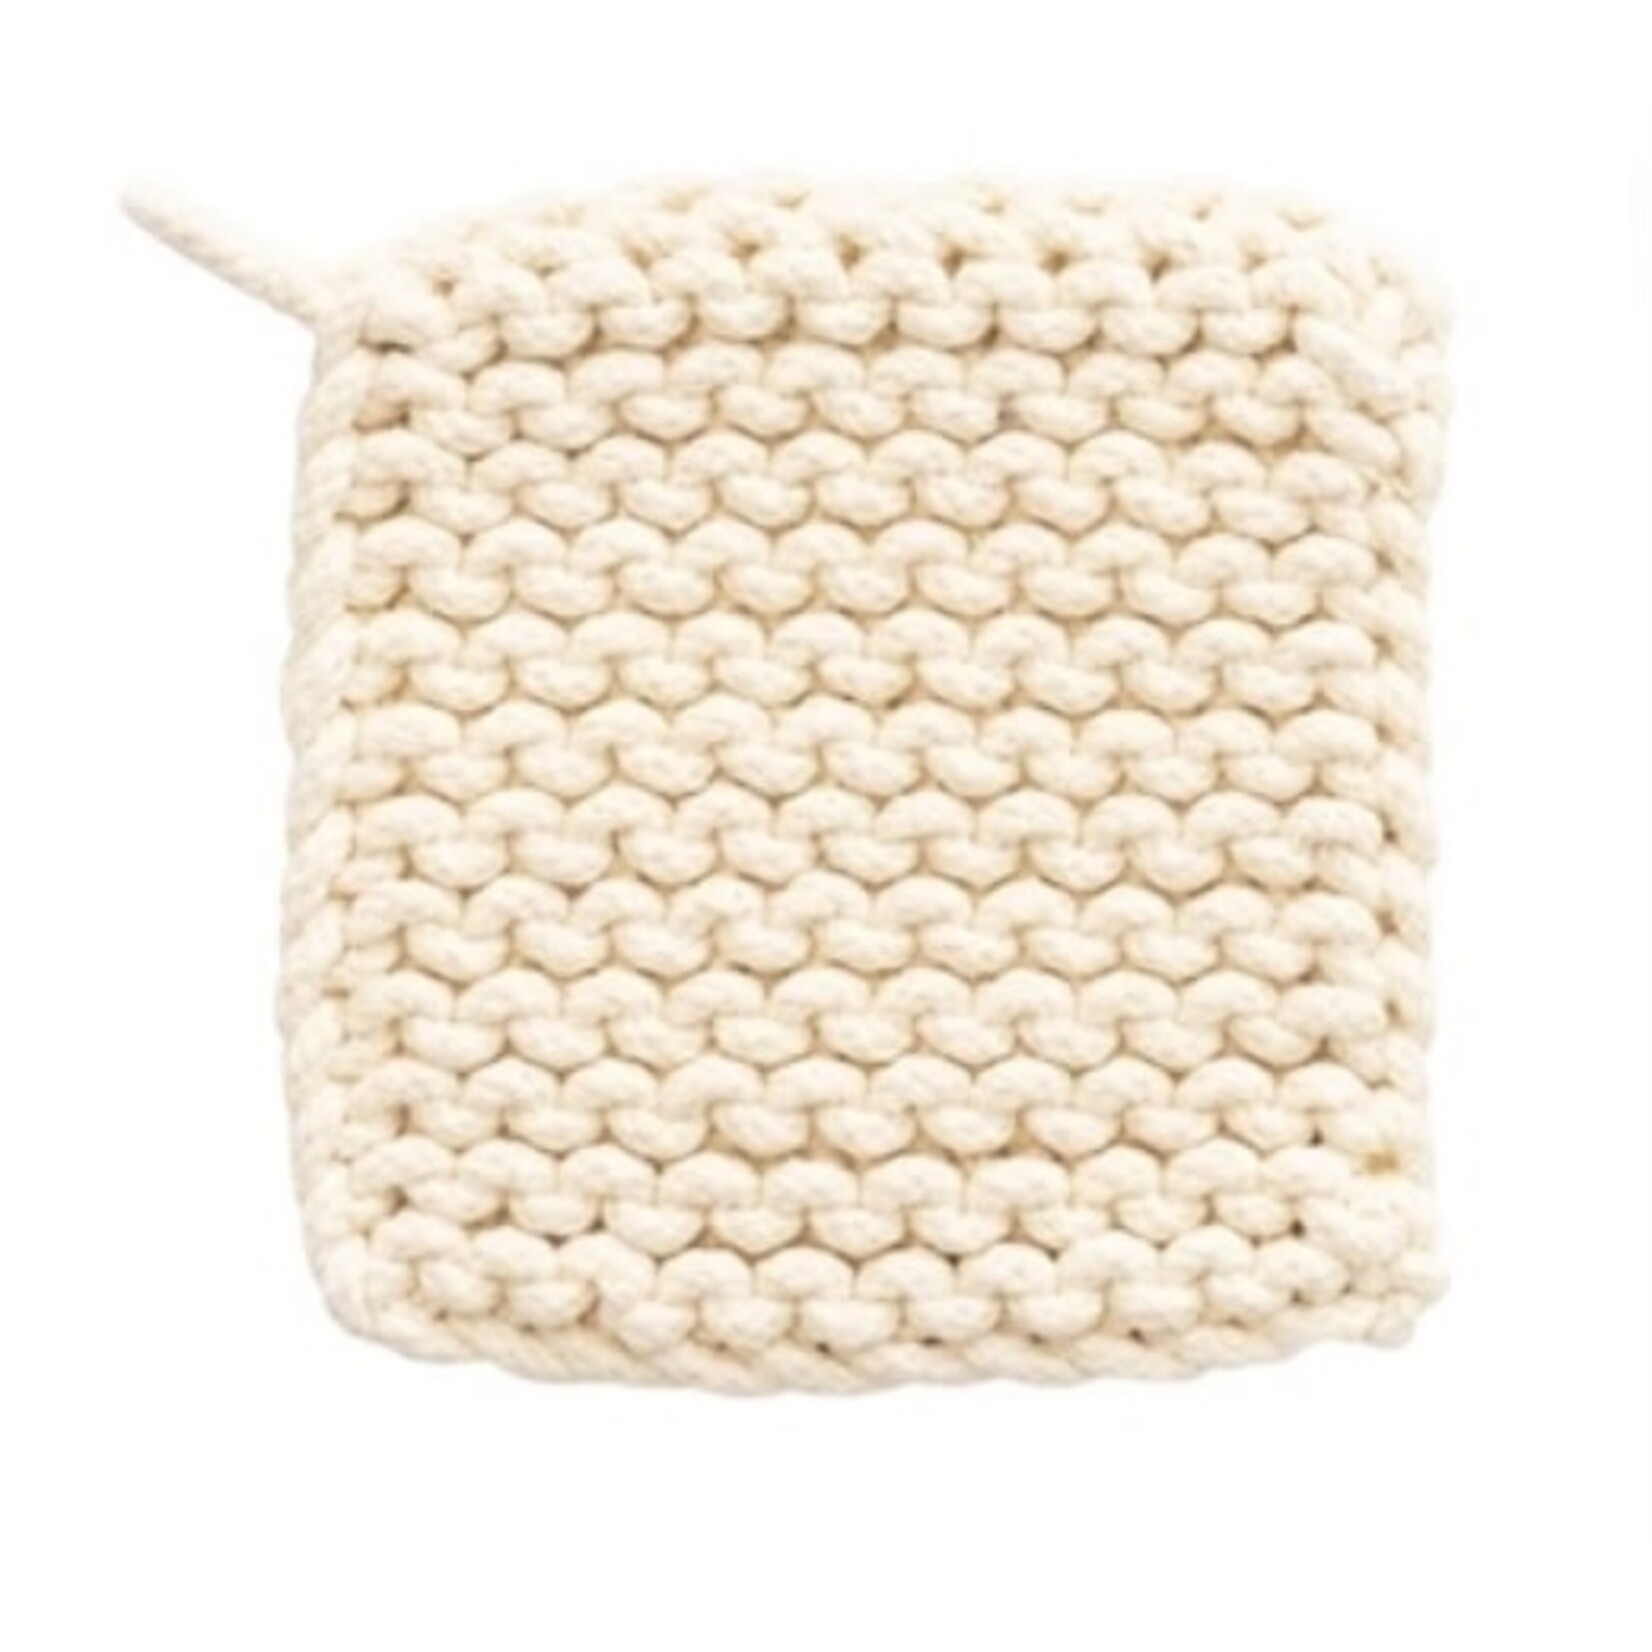 Creative Co-op Square Cotton Crocheted Pot Holder